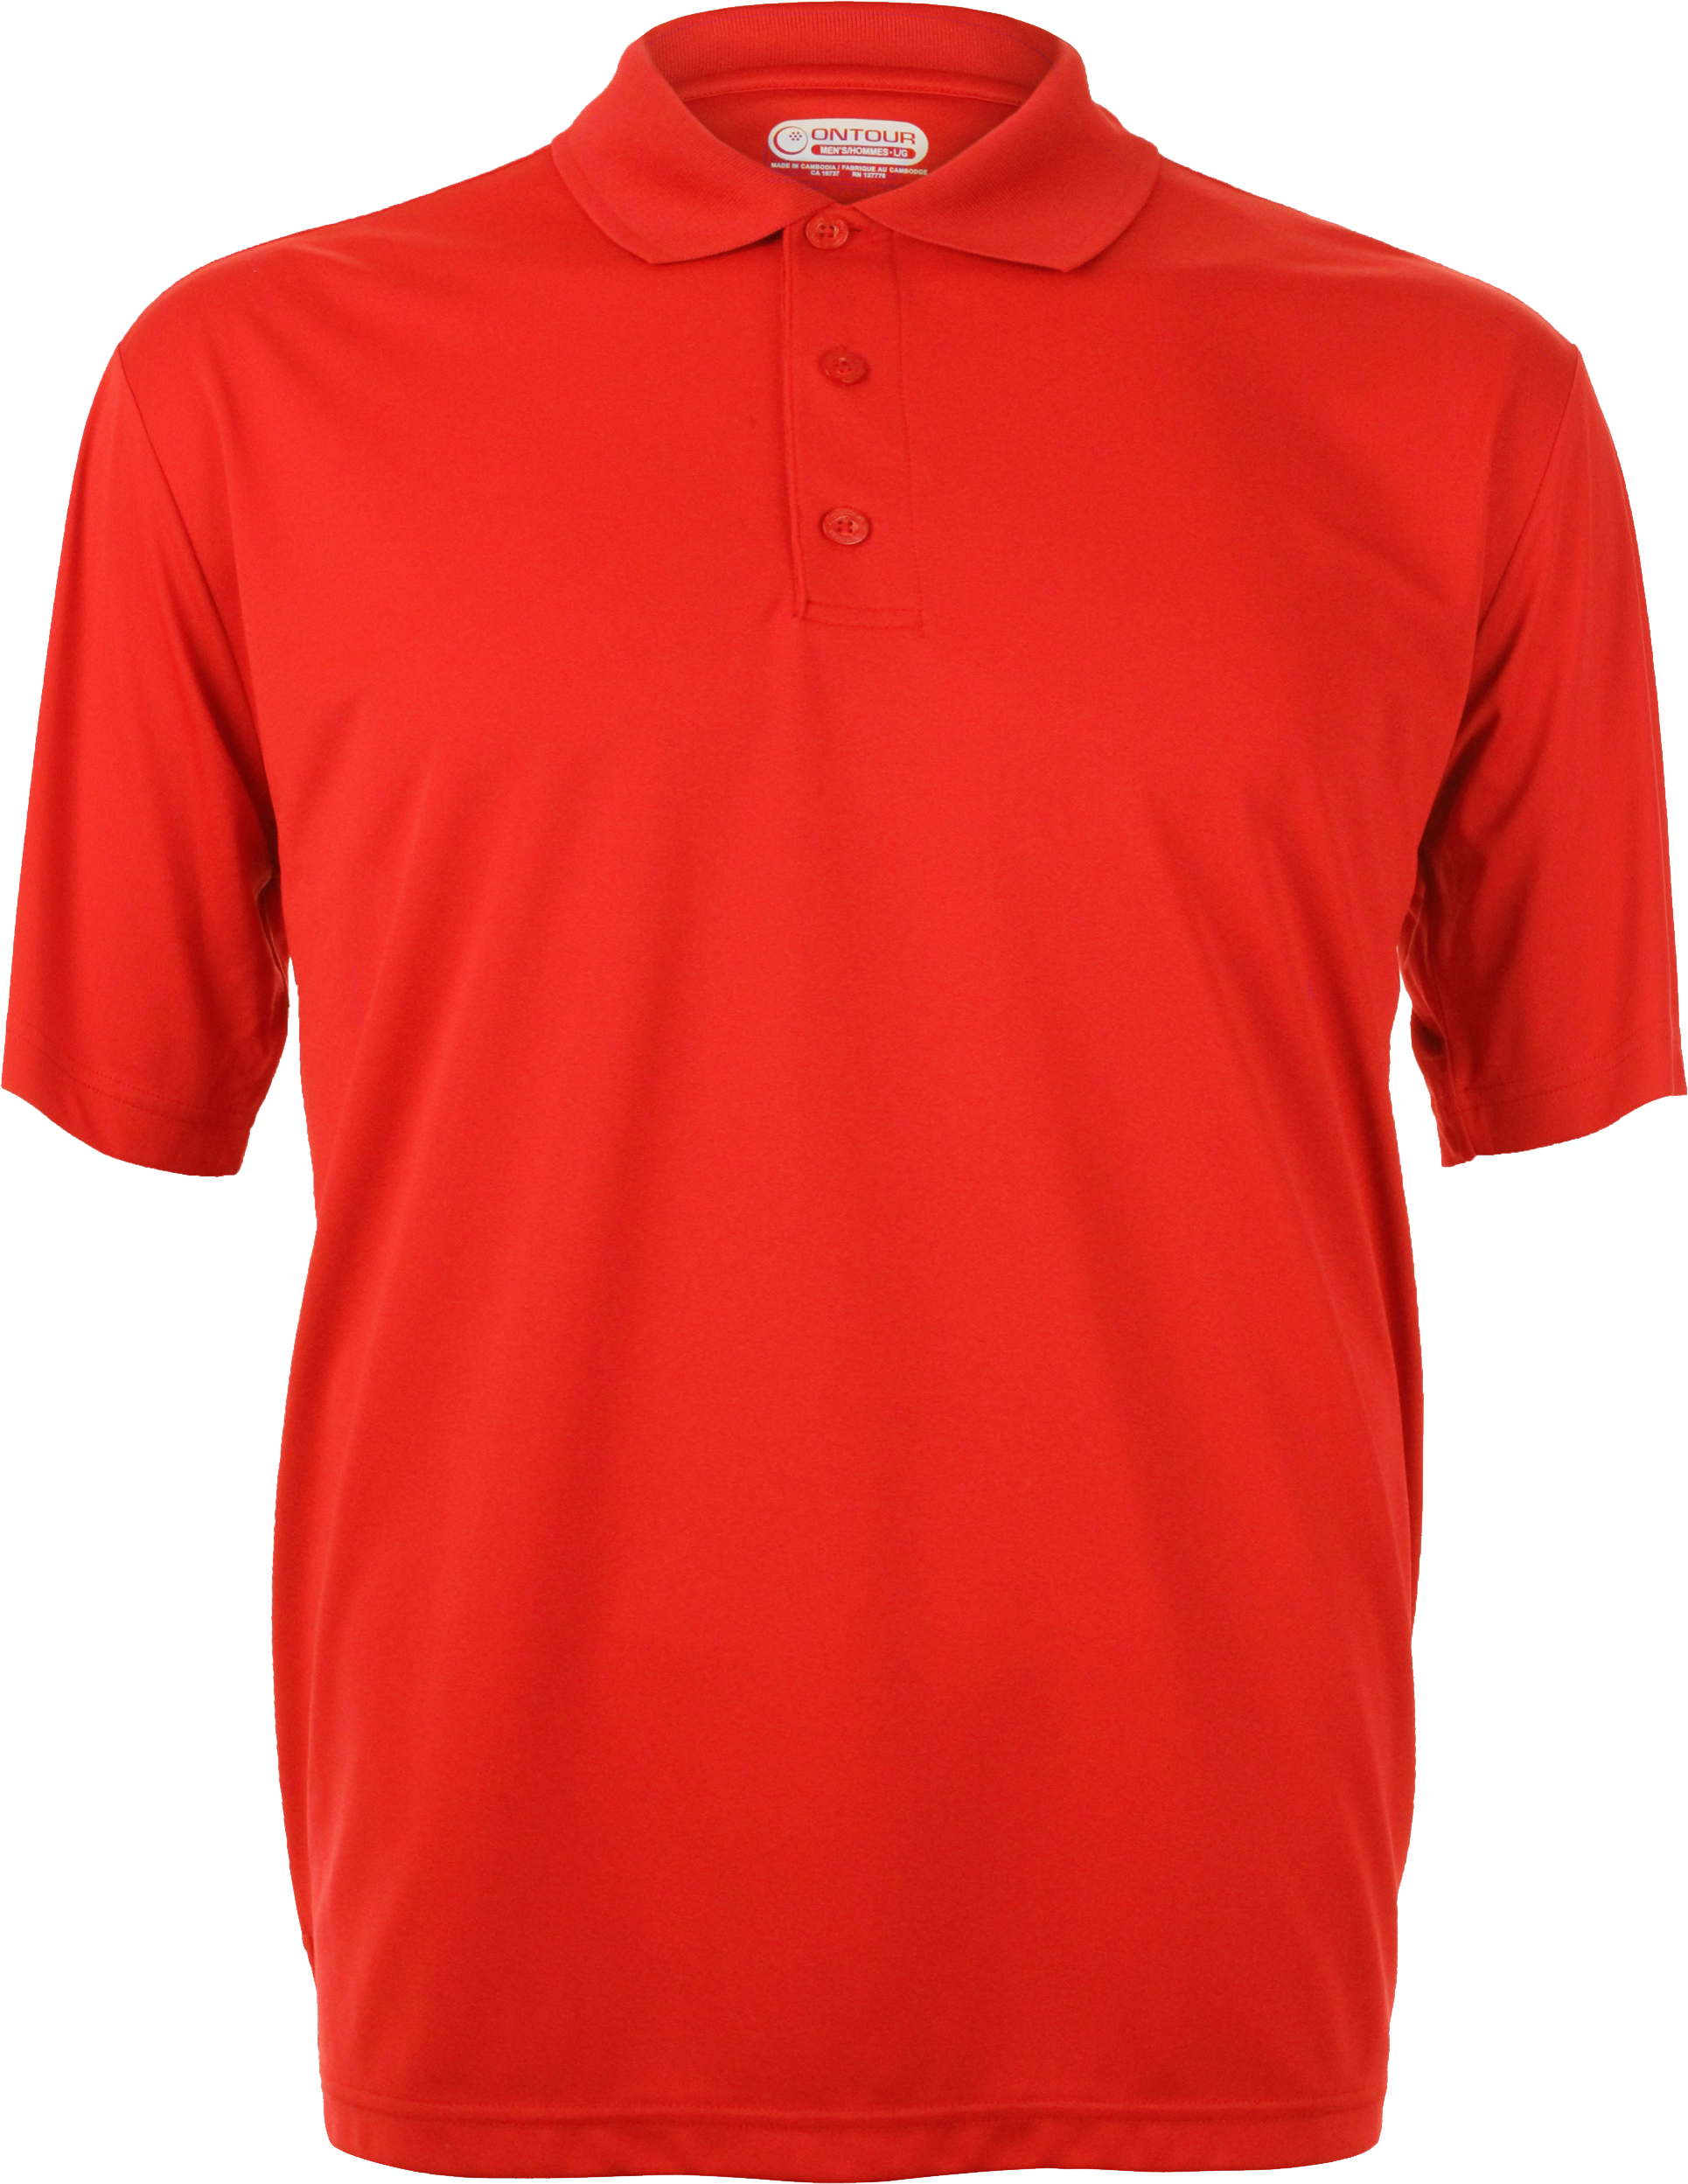 Shirt clipart red shirt. Png images free download